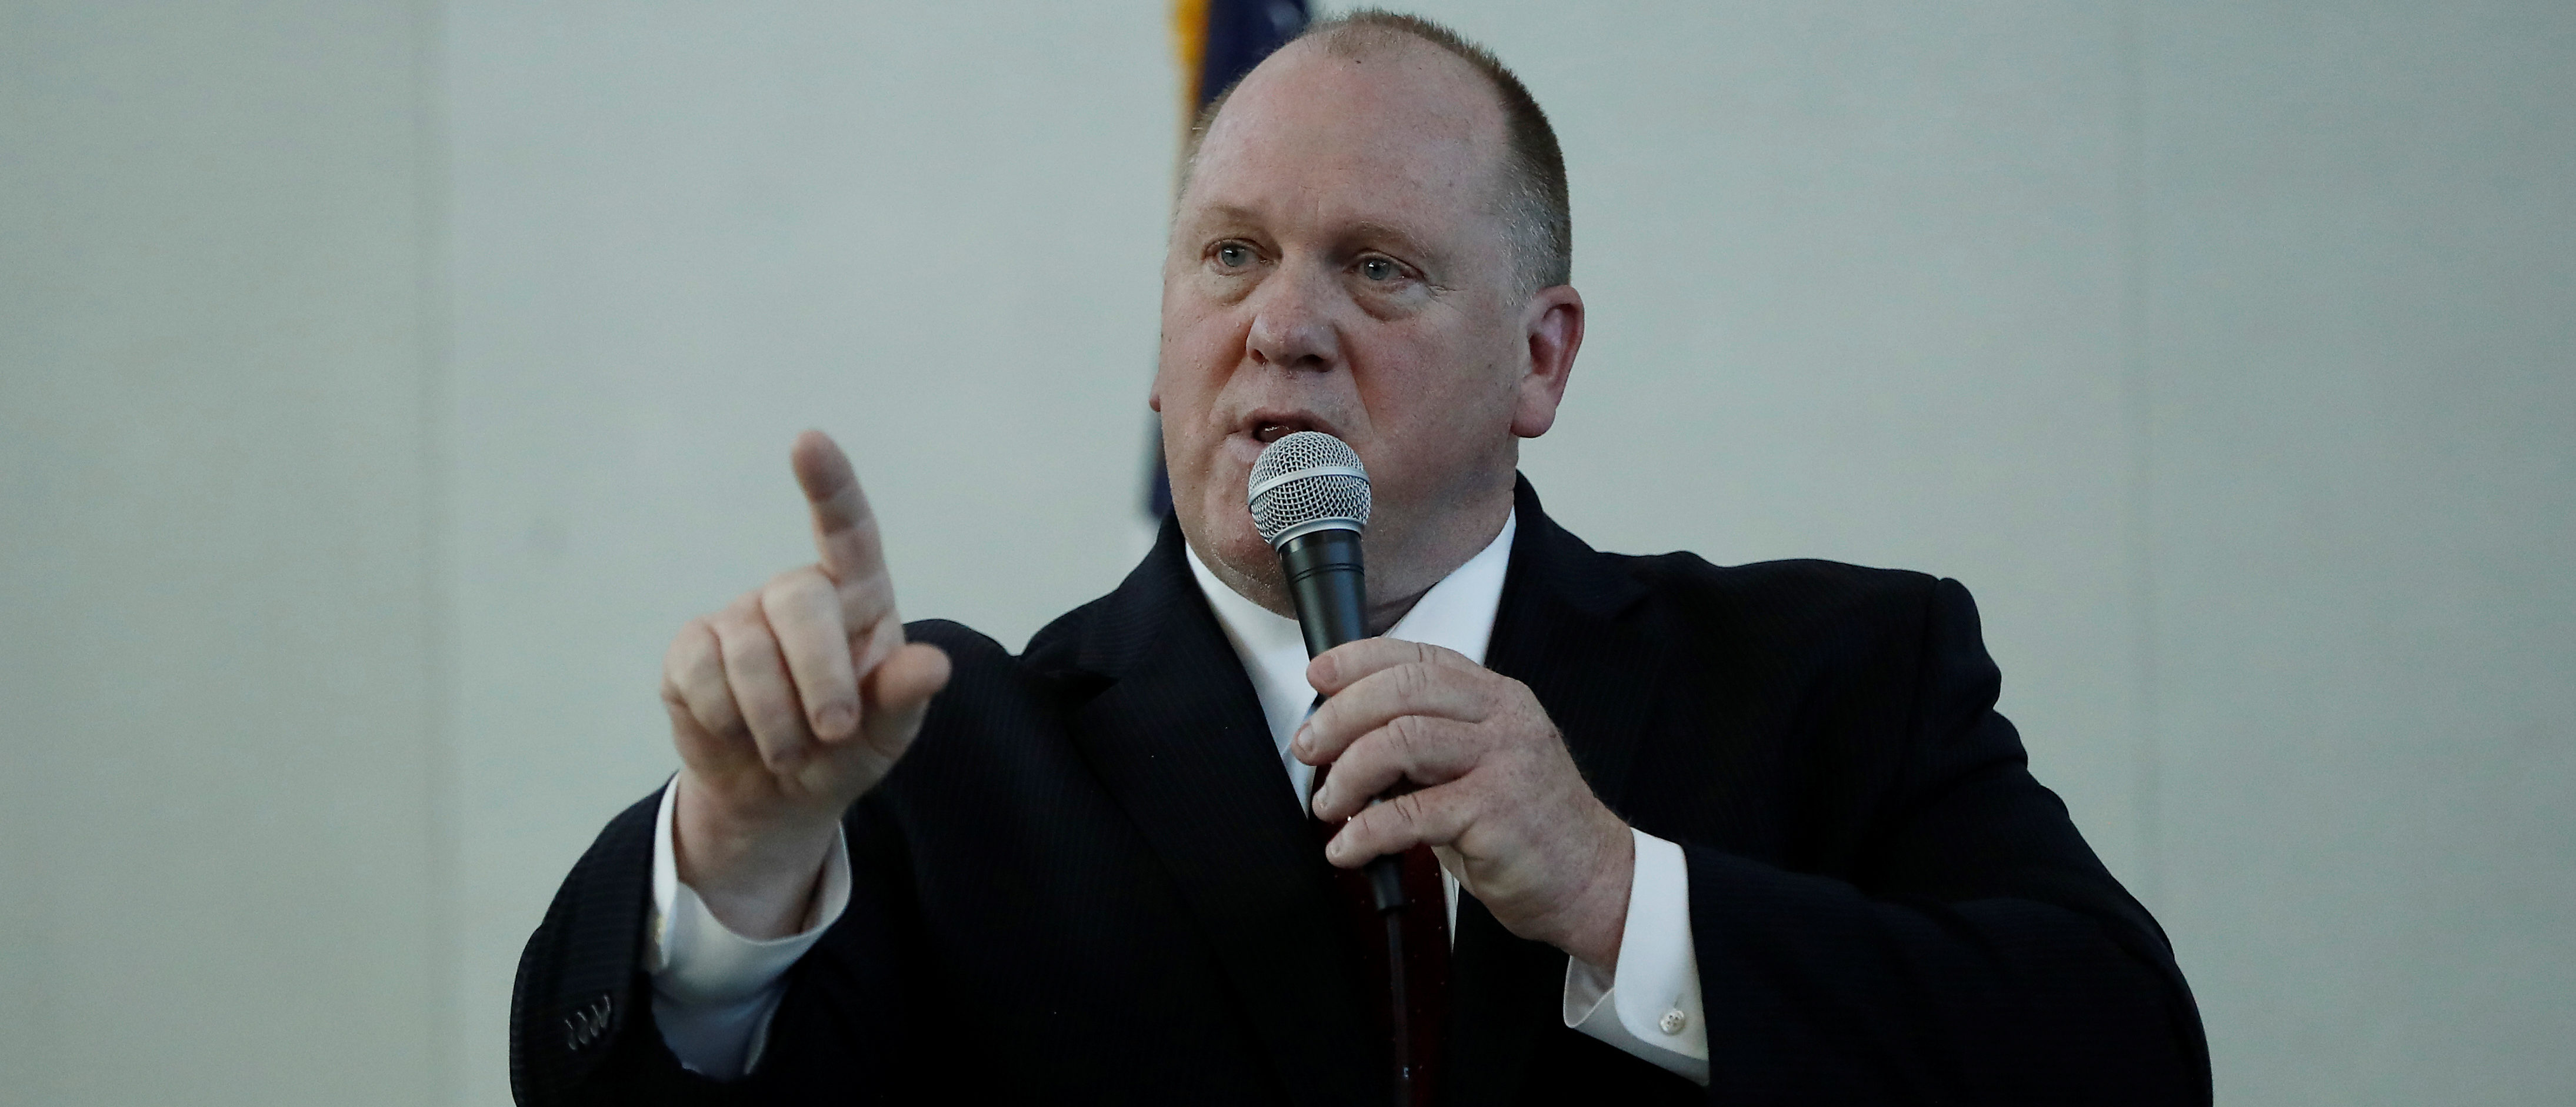 Thomas Homan, acting director of U.S. Immigration and Customs Enforcement (ICE), speaks during a town hall meeting in Sacramento